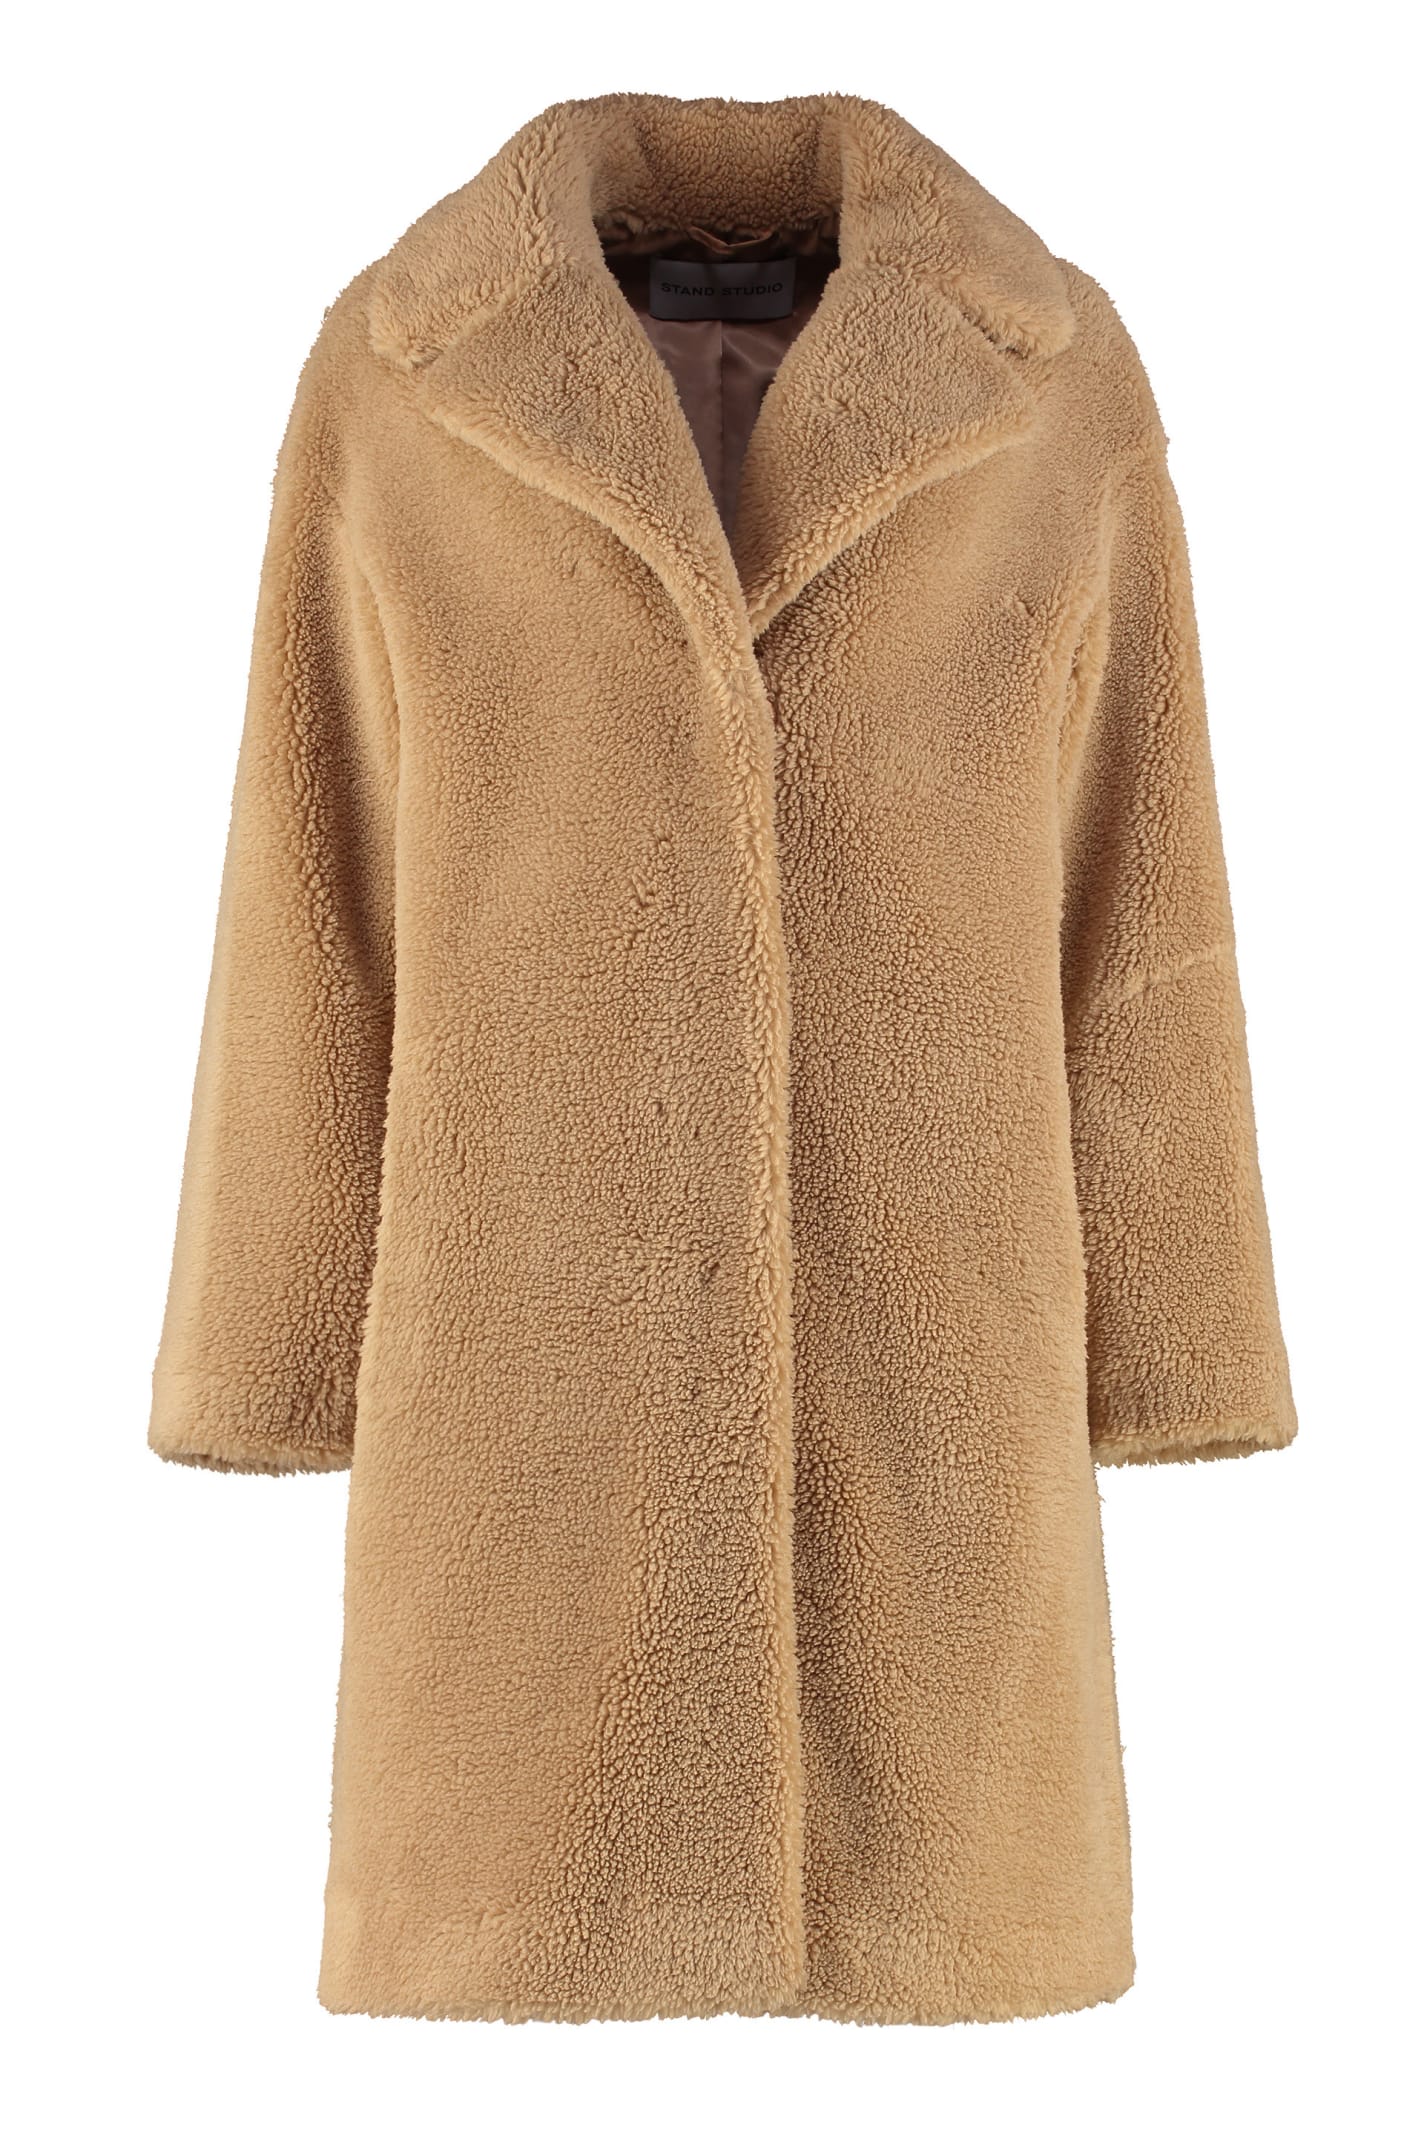 STAND STUDIO Camille Eco-shearling Coat